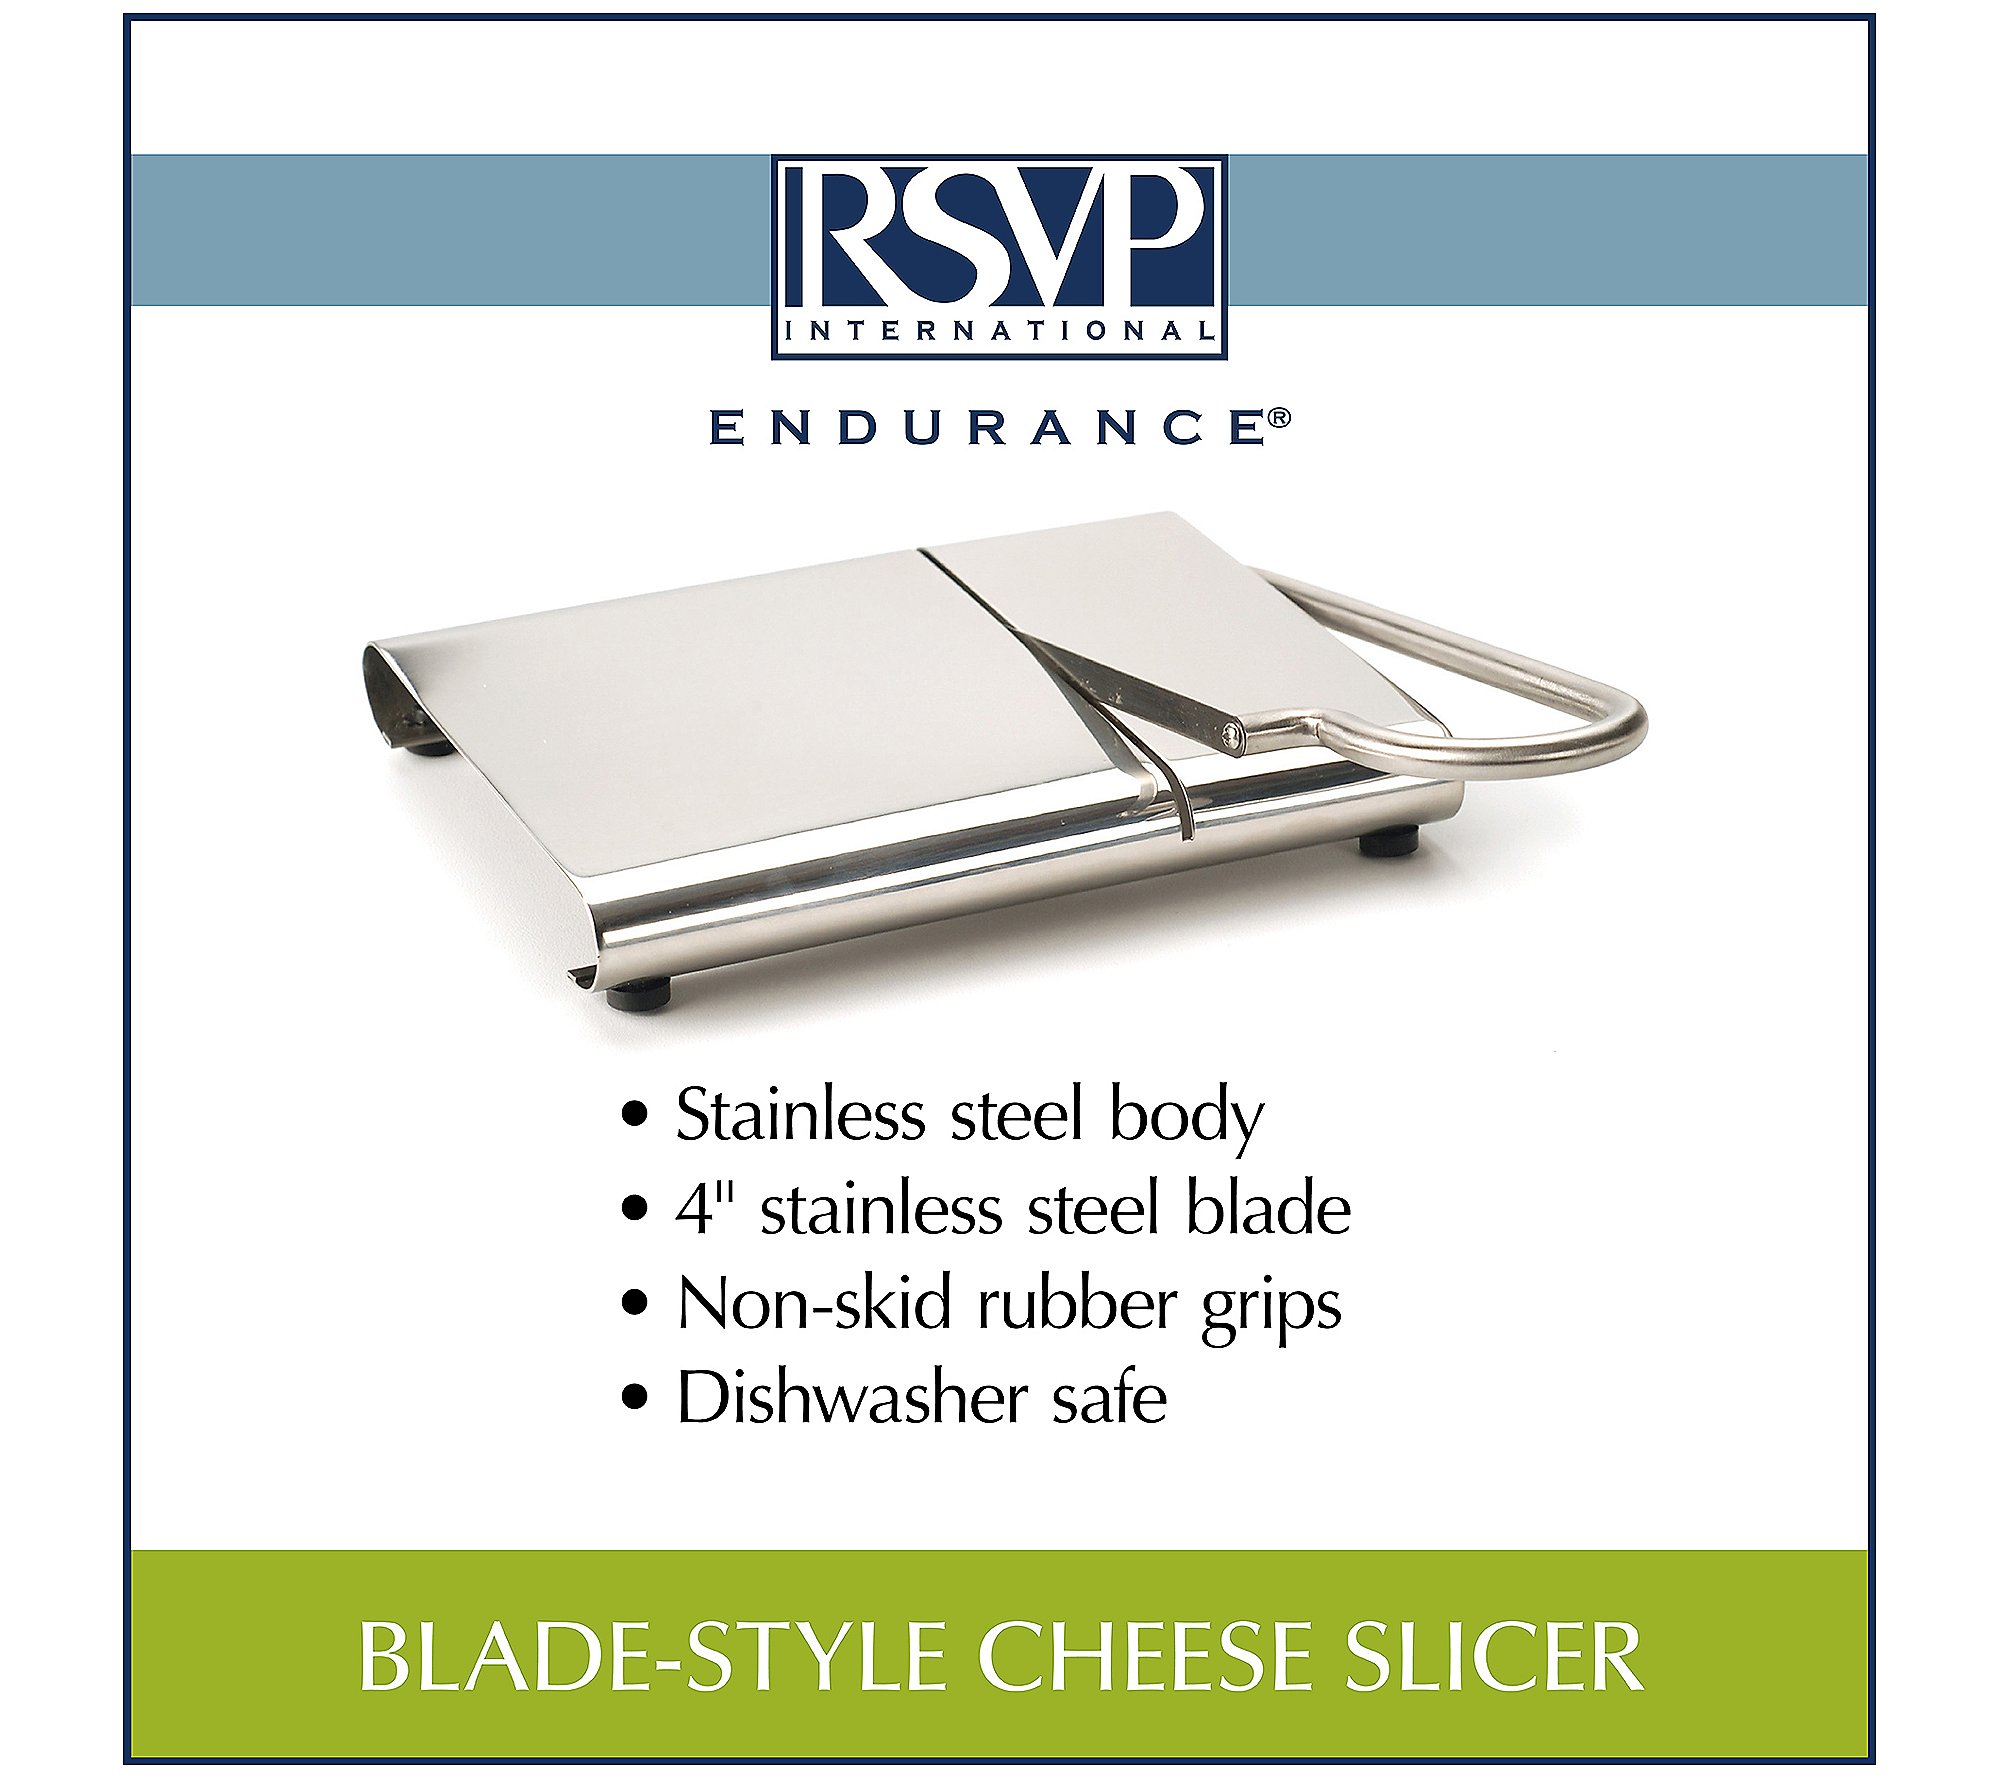 RSVP Cheese Slicer with Blade